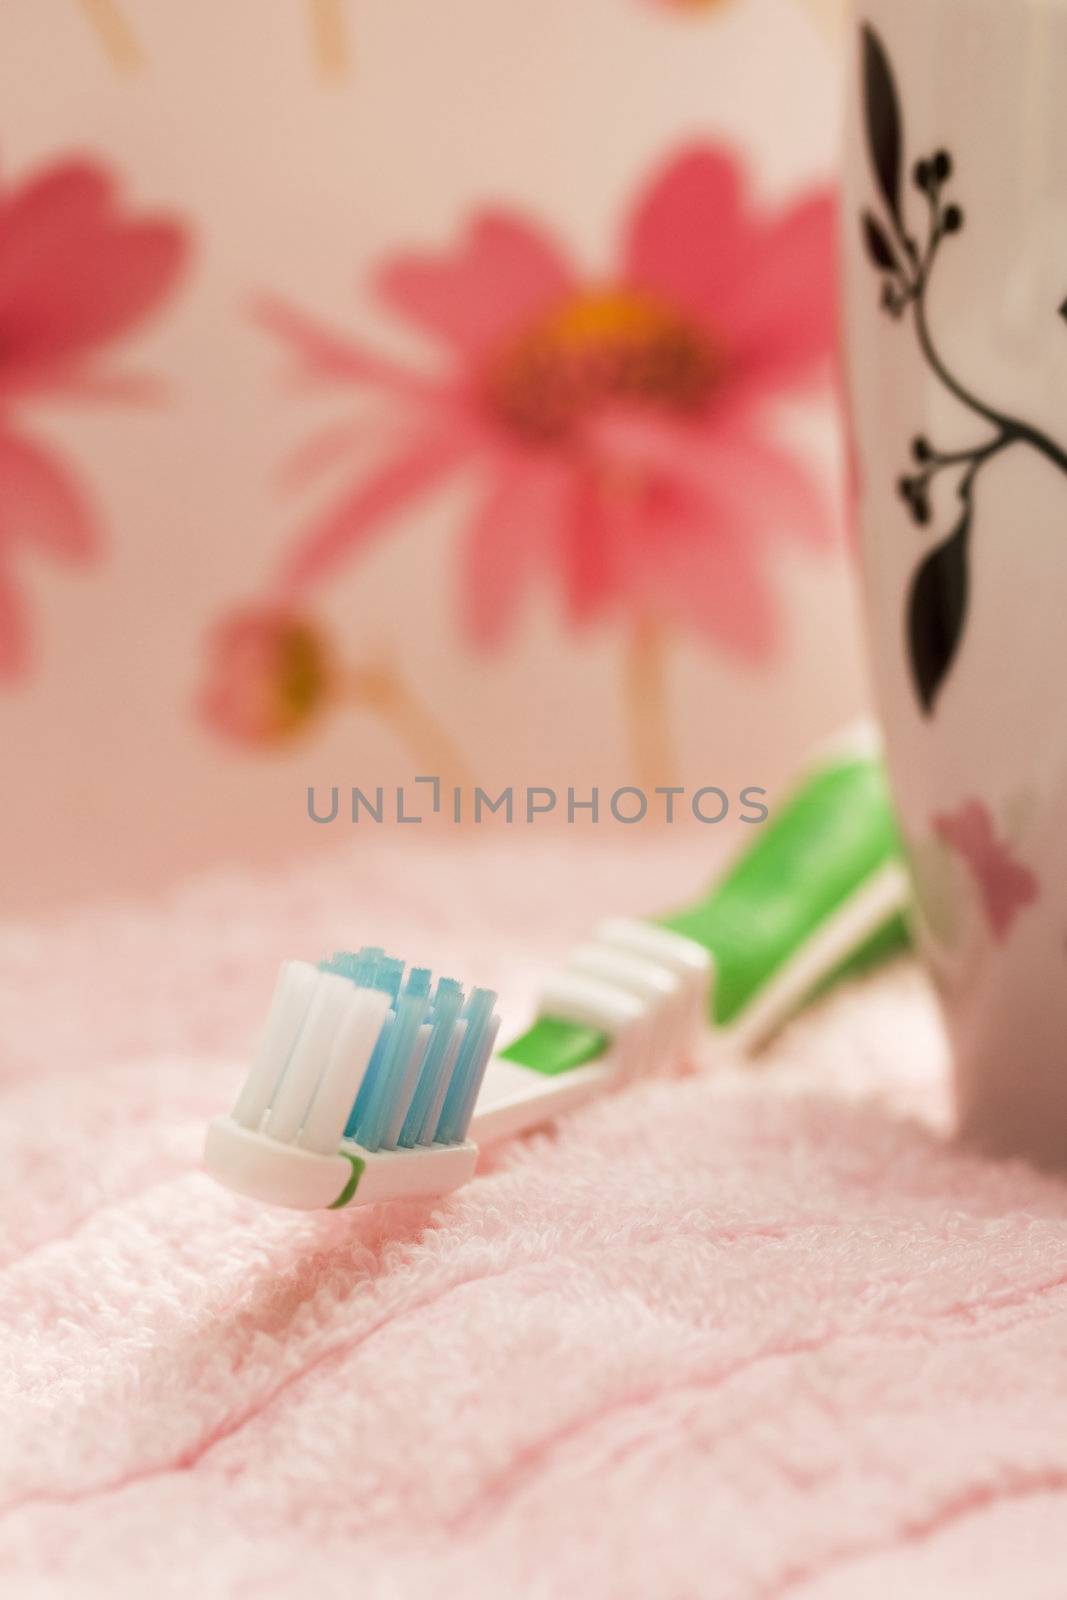 Toothbrush on the pink towel